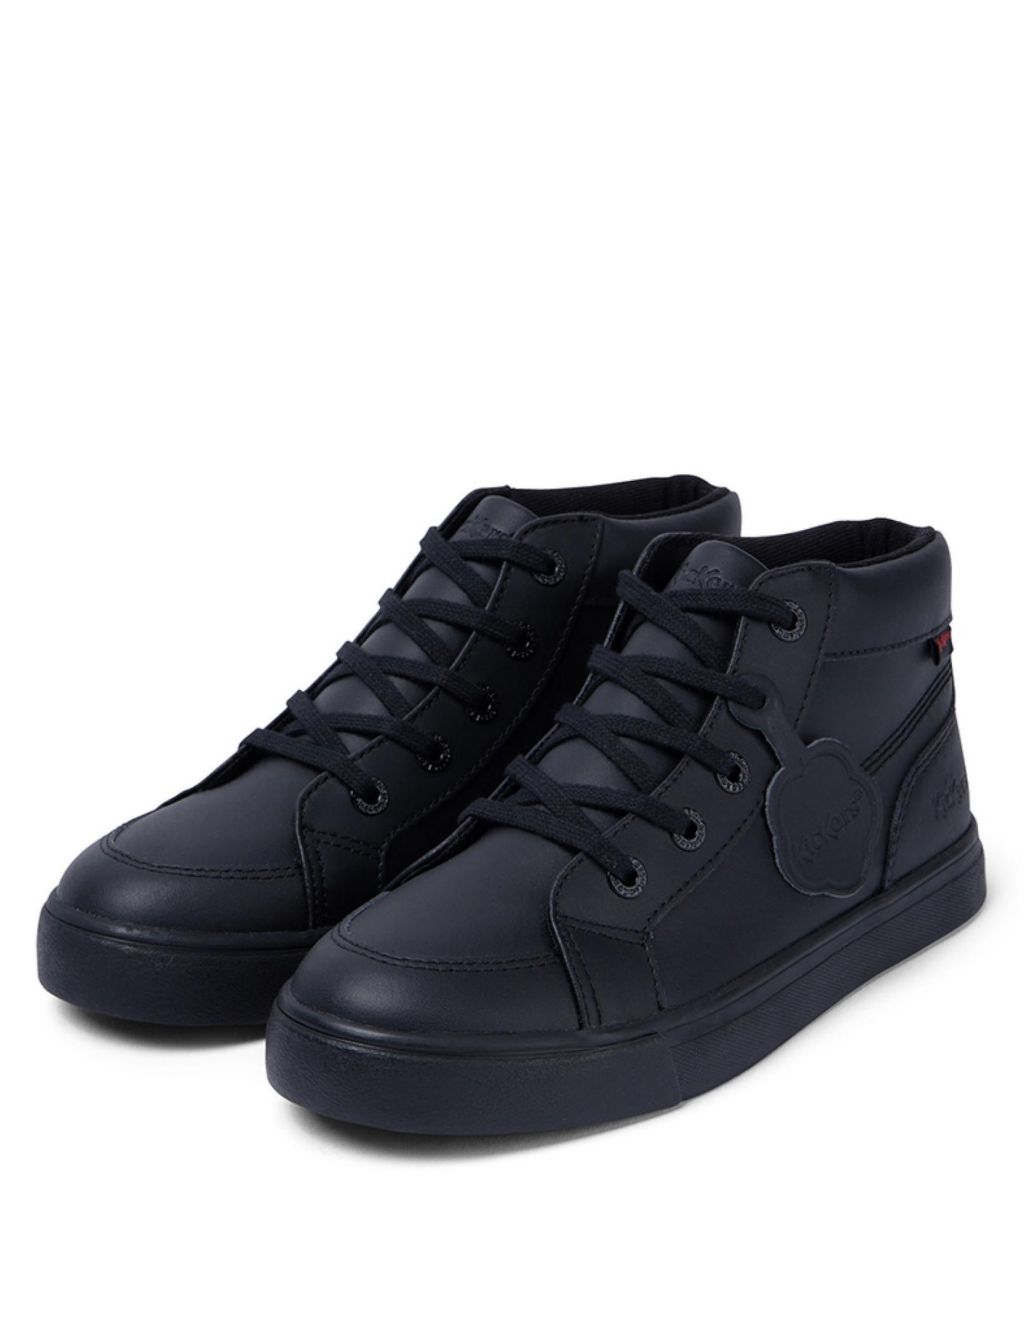 Kids' Leather High Top School Shoes image 2